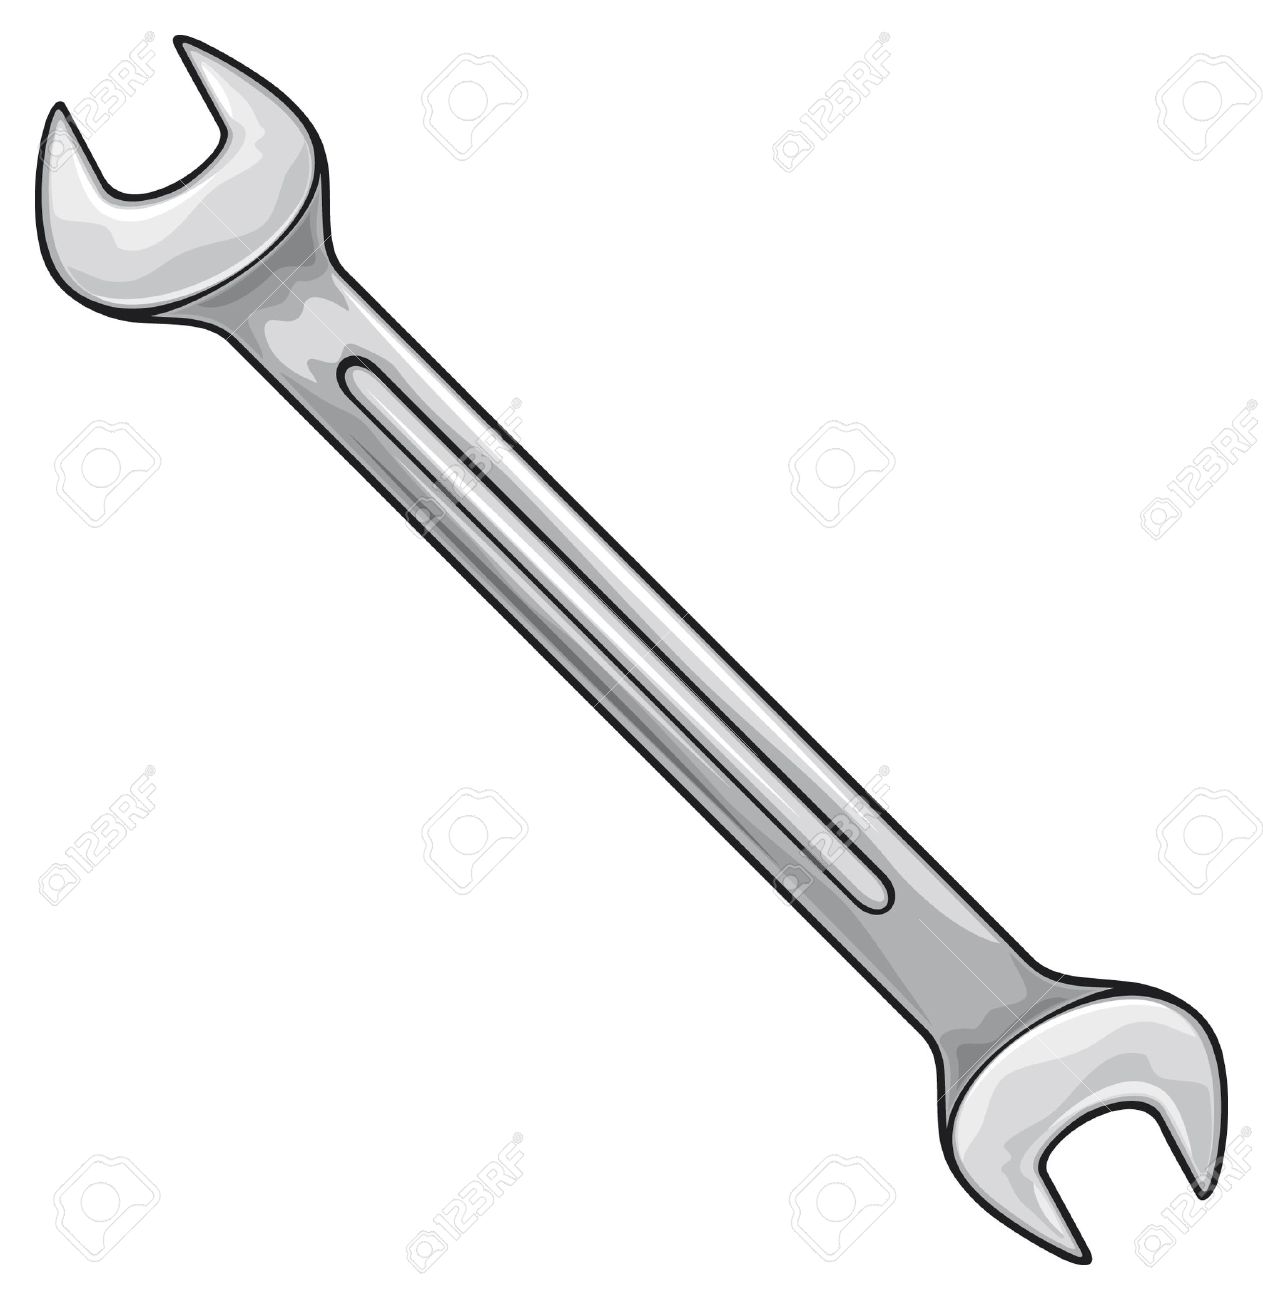 Spanner or wrench tool icon -